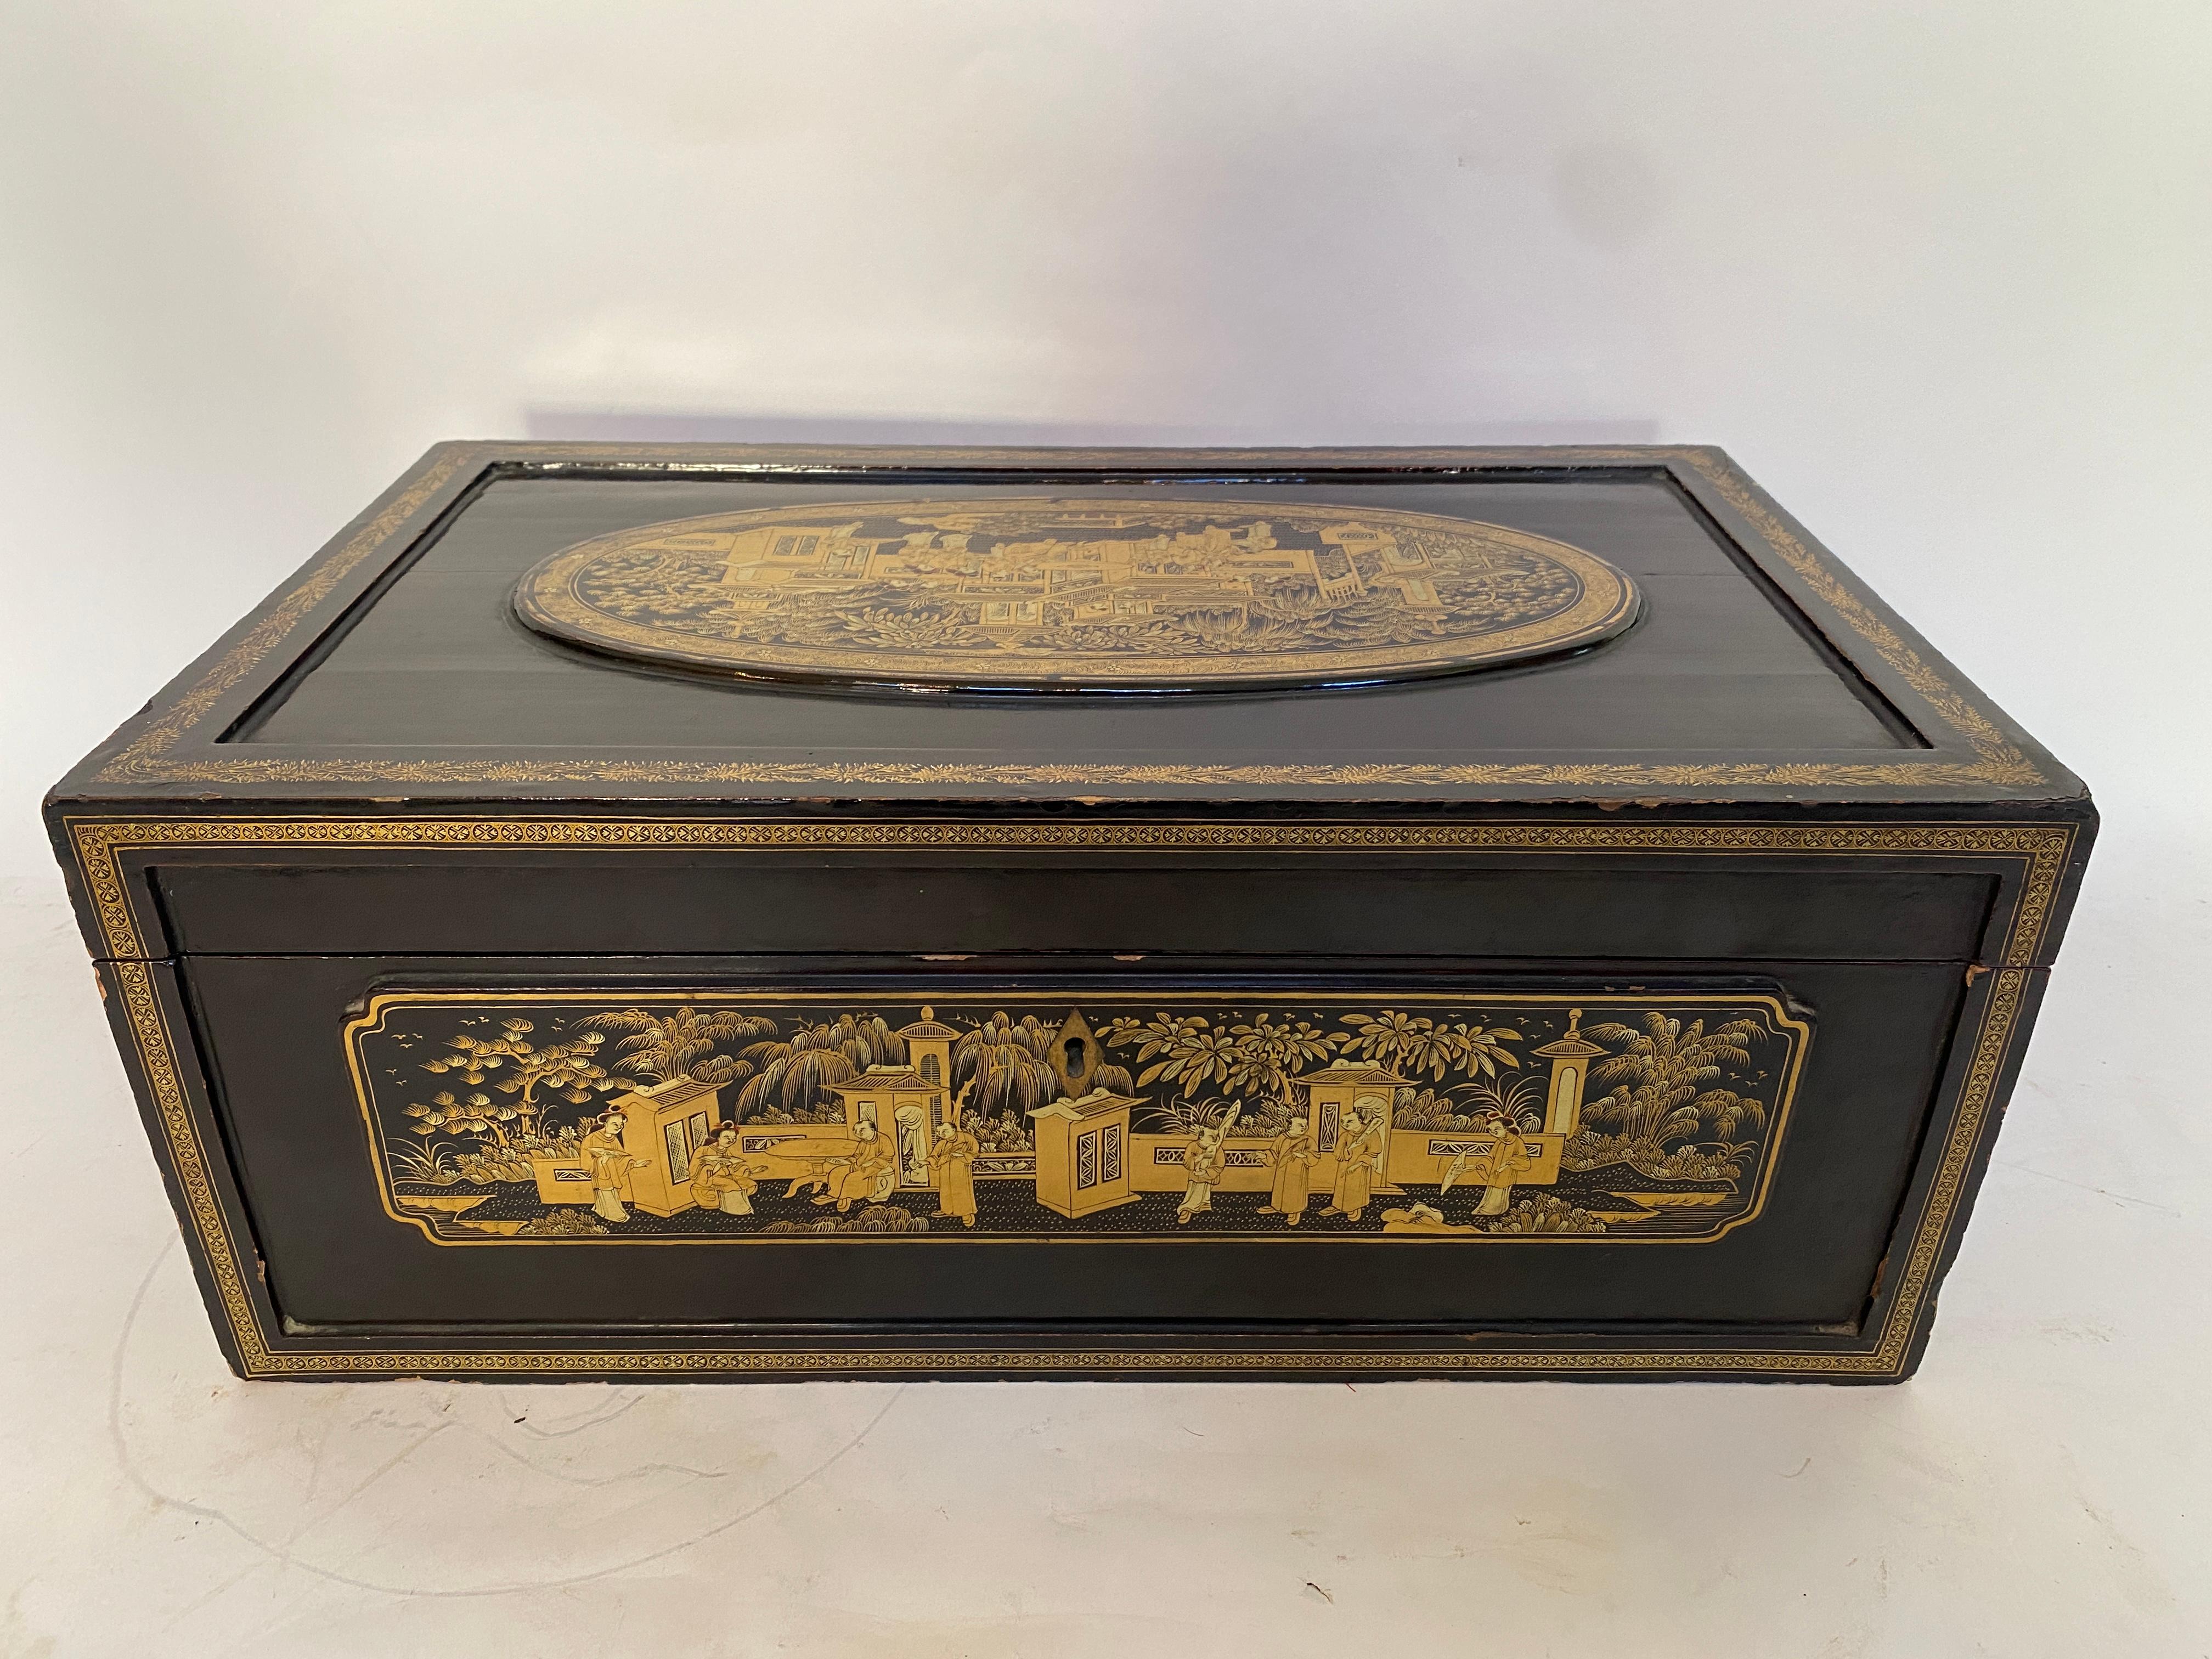 A truly beautiful and amazing piece. From the late 19th century of the Qing Dynasty in China, this lacquered writing box is decorated with the designs hand paint and gilt on black lacquer . Some tears due to age, see pictures for more.